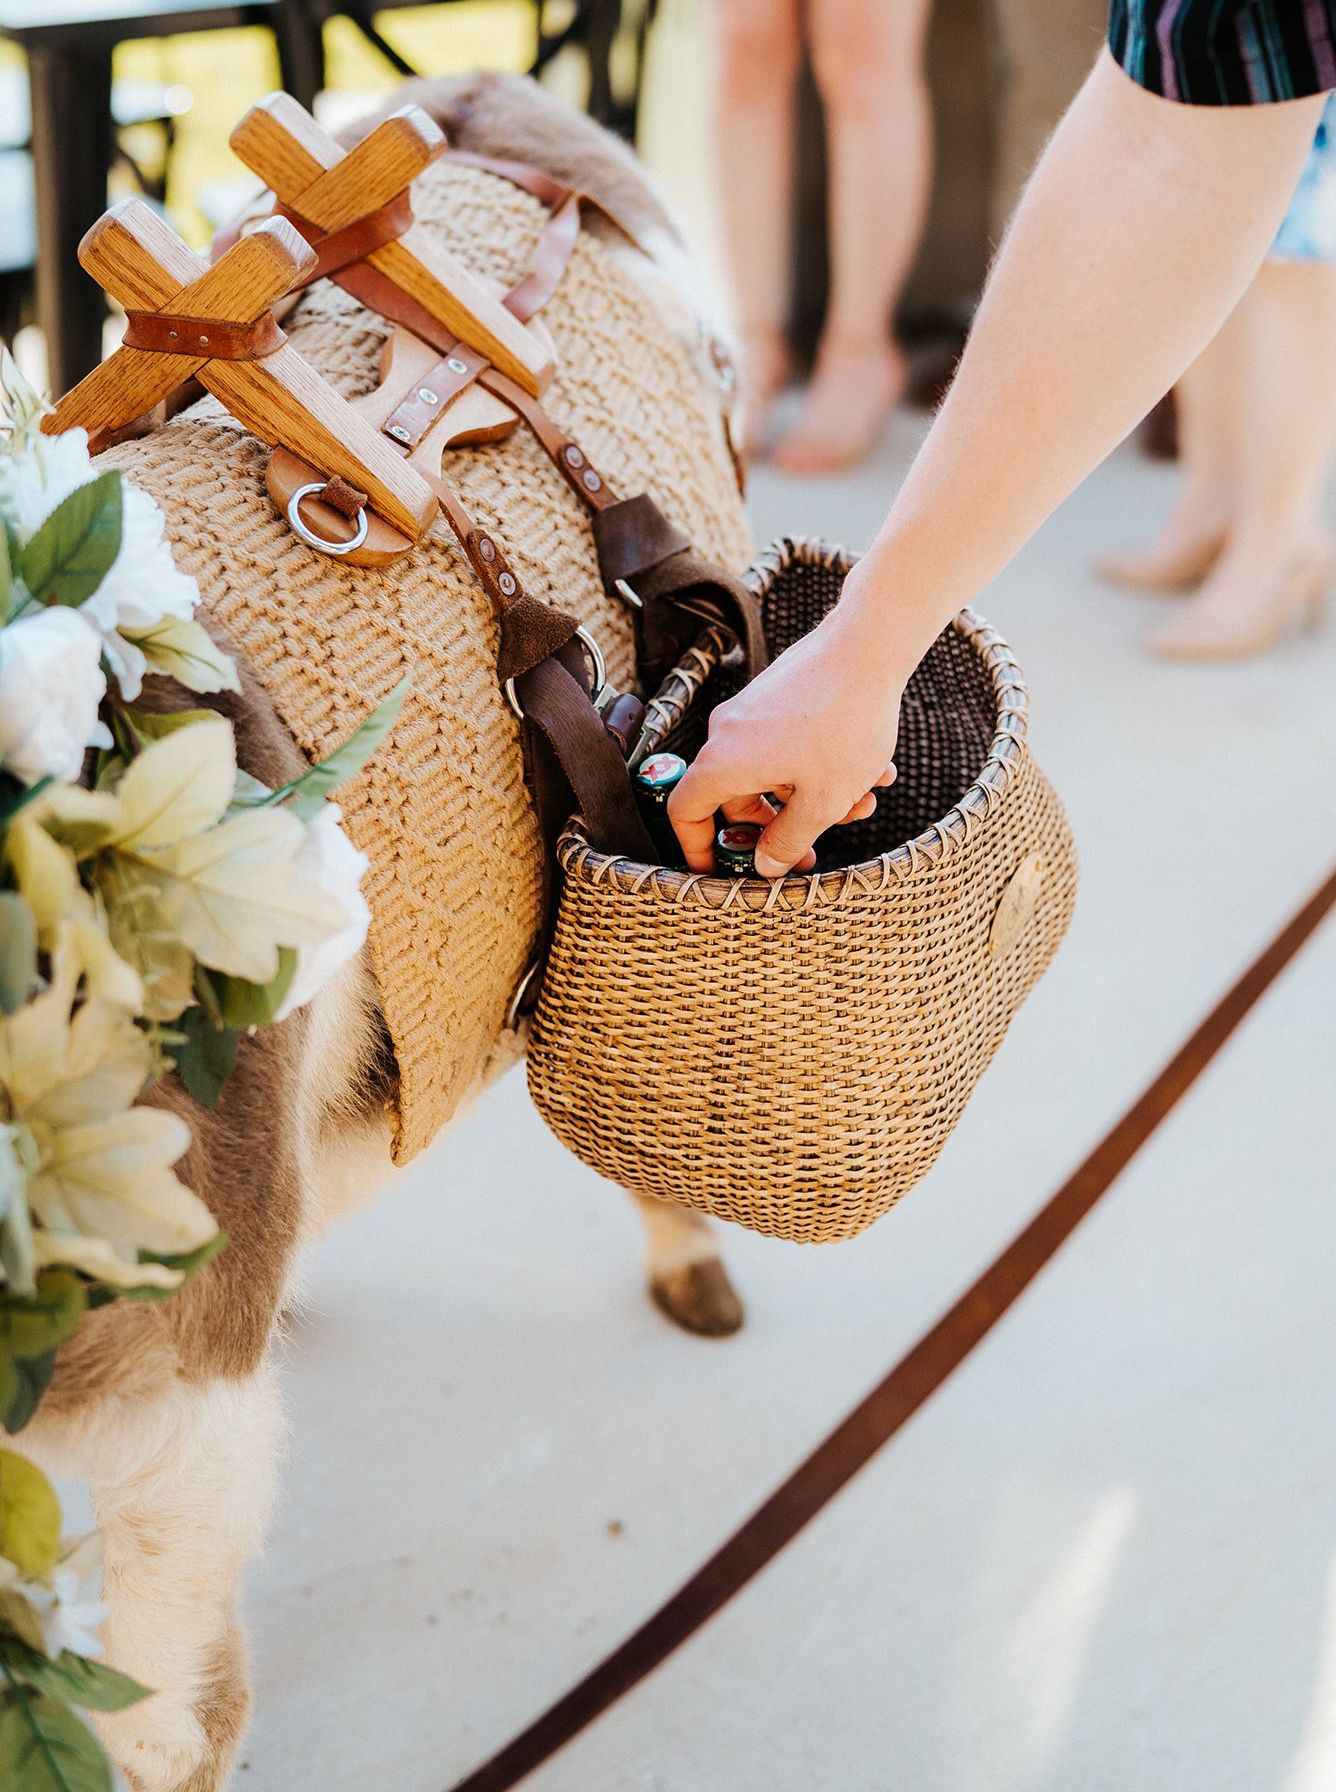 A guest grabs a cold beer from one of the adorable beer burros after an outdoor wedding ceremony in Texas hill country.